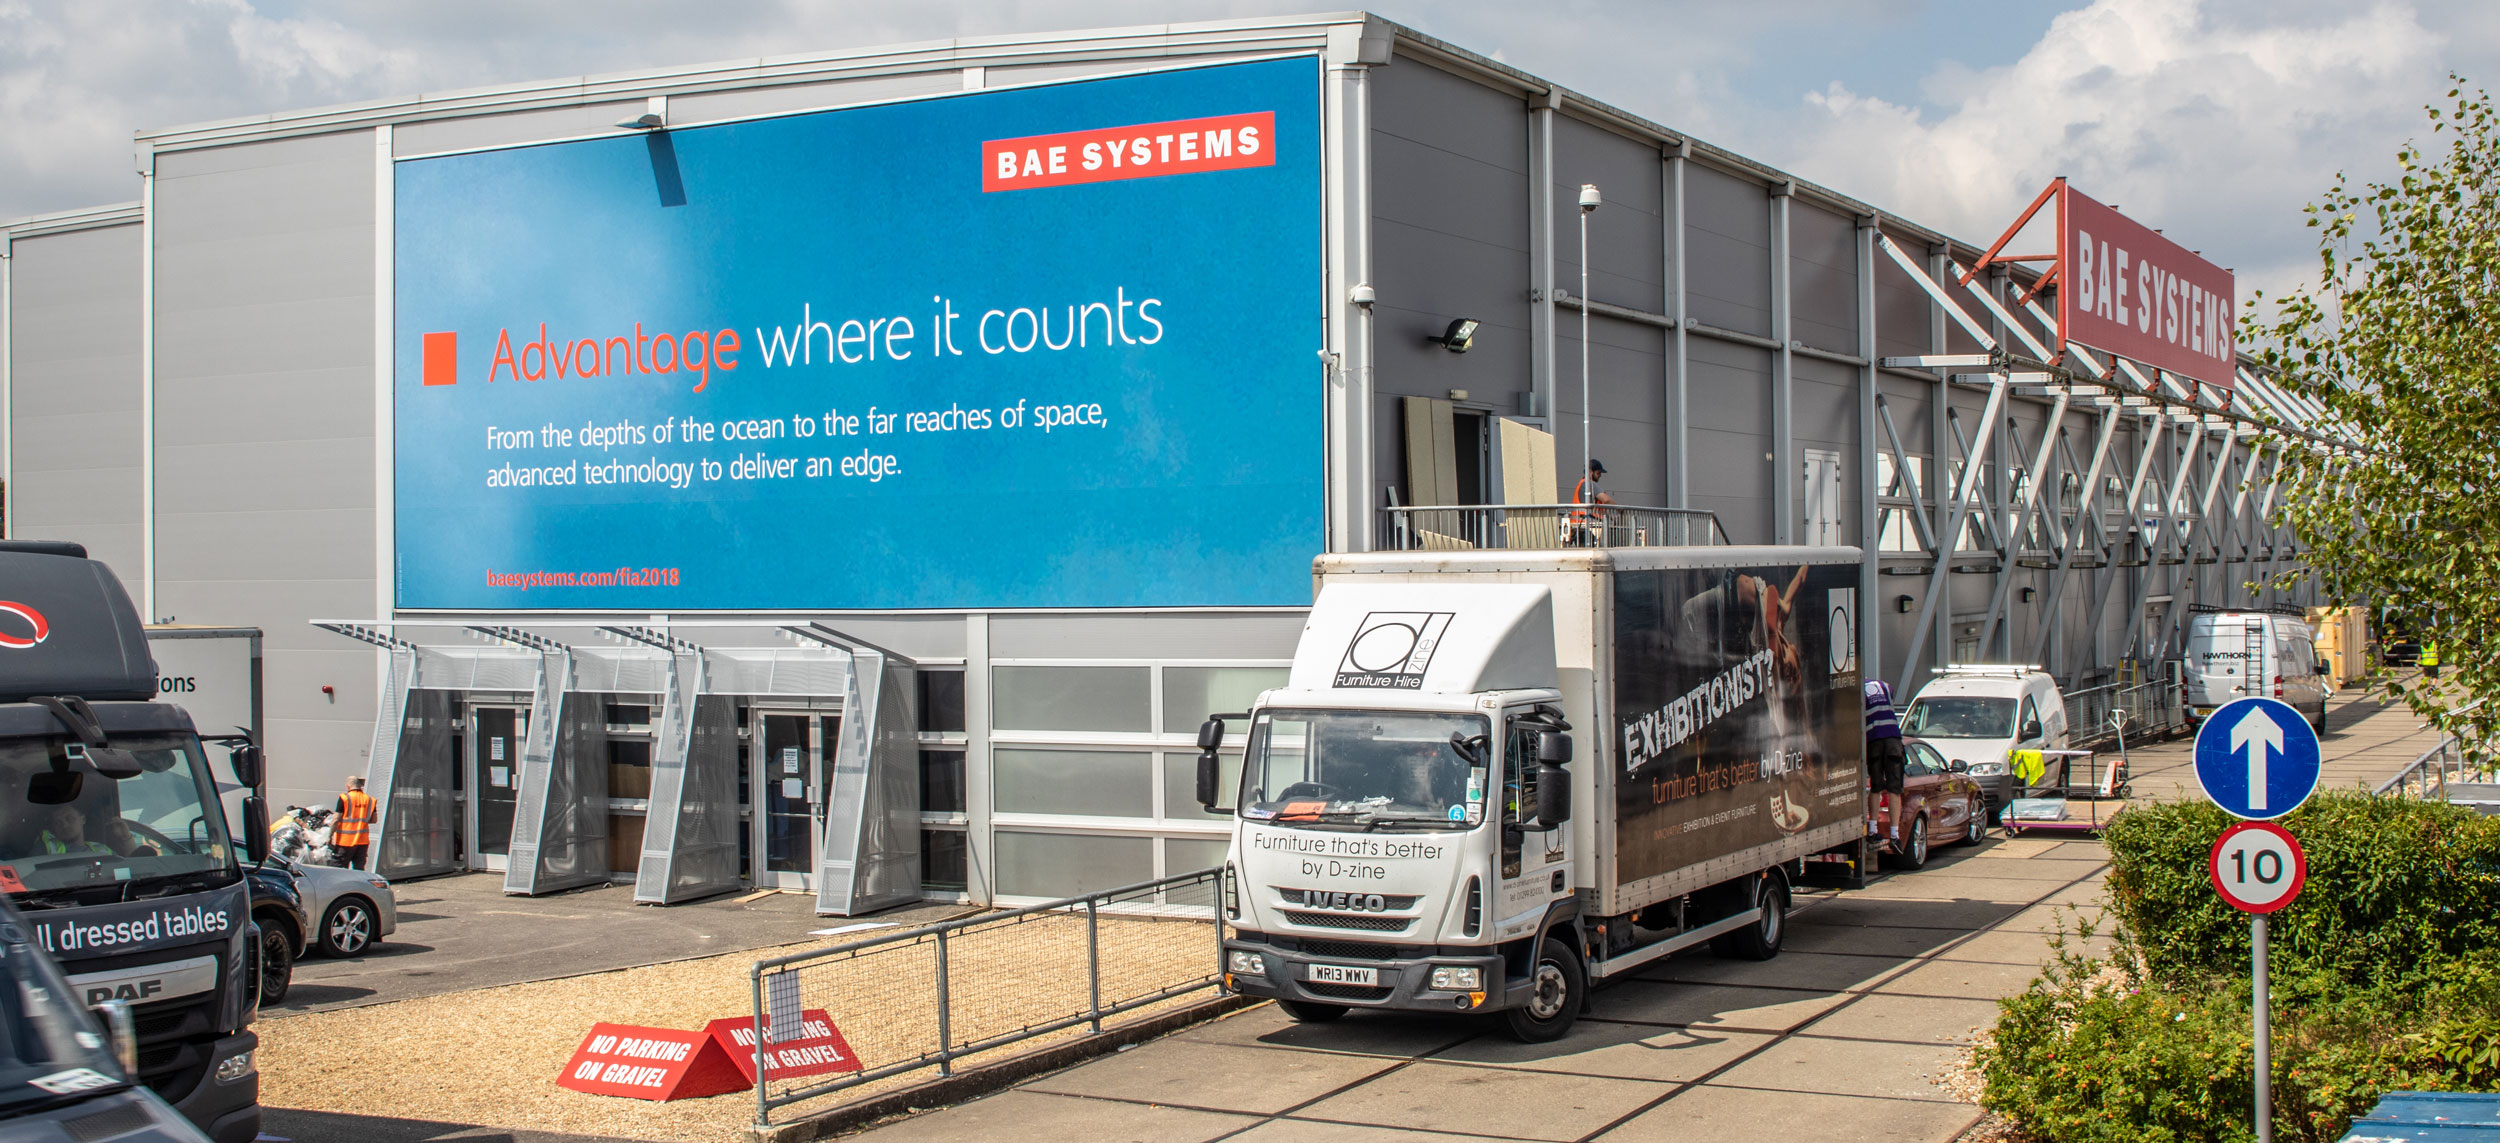 Trusted by Europe’s largest events to deliver on-time, every time